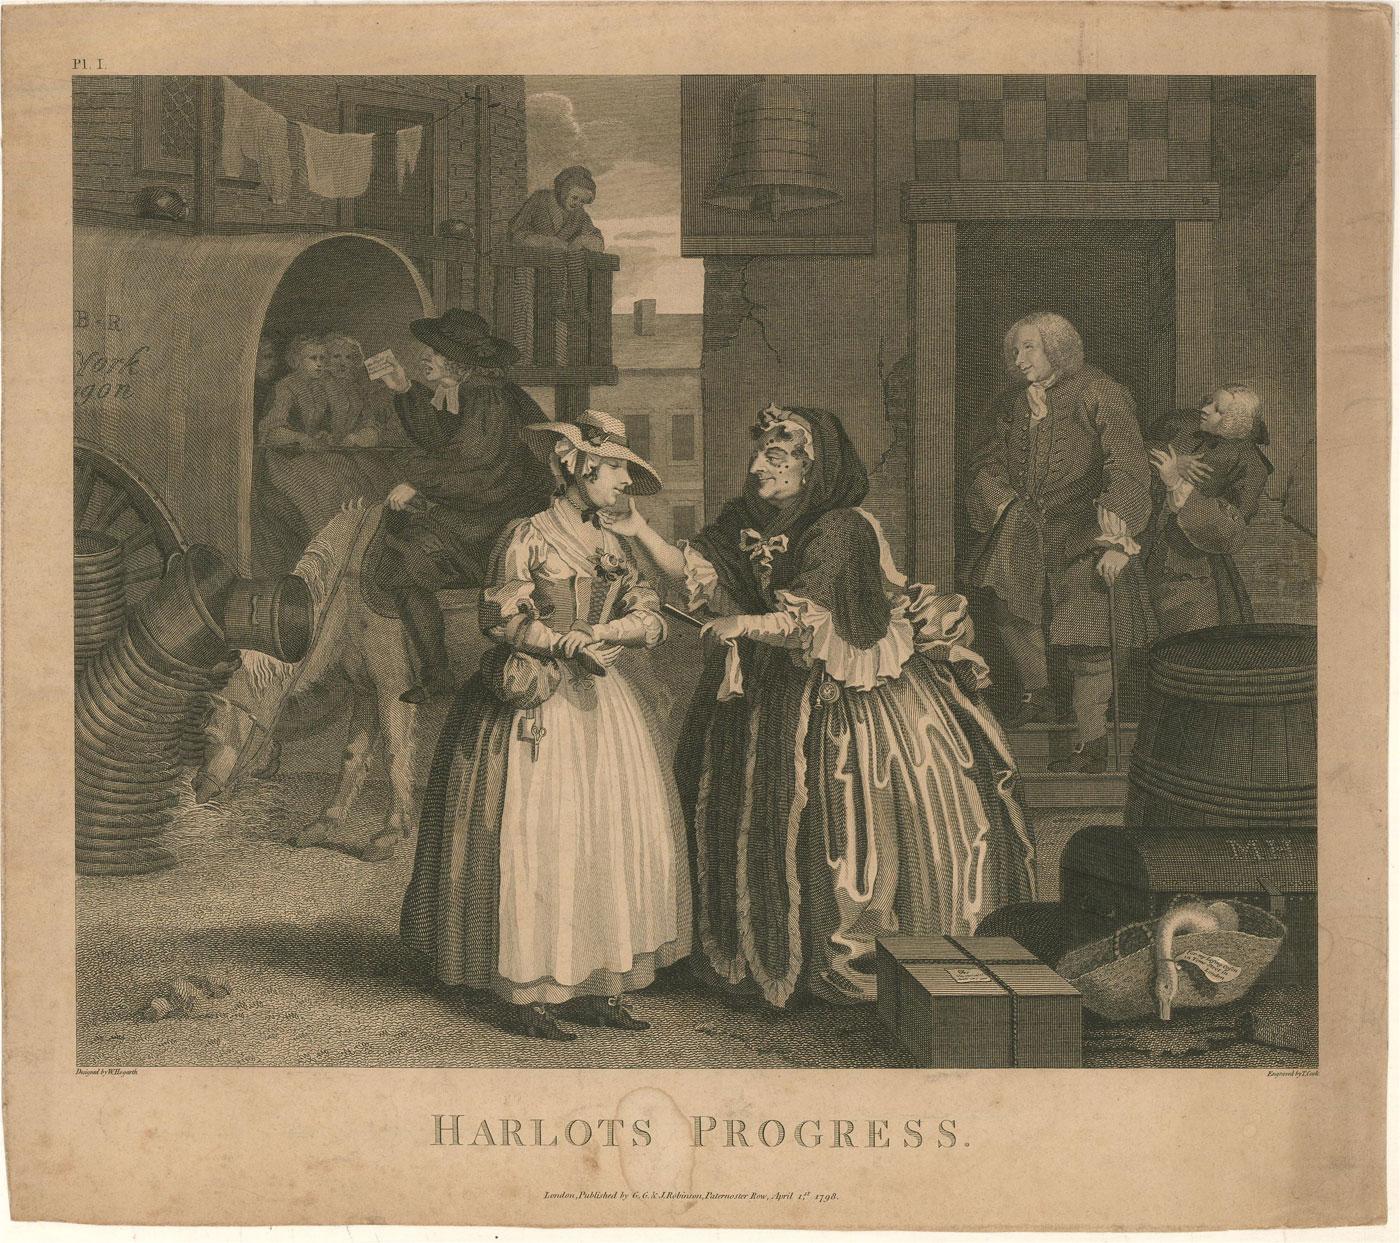 T. Cook after Hogarth - Six Early 19th Century Engravings, A Harlot's Progress - Print by Thomas Cook after Hogarth